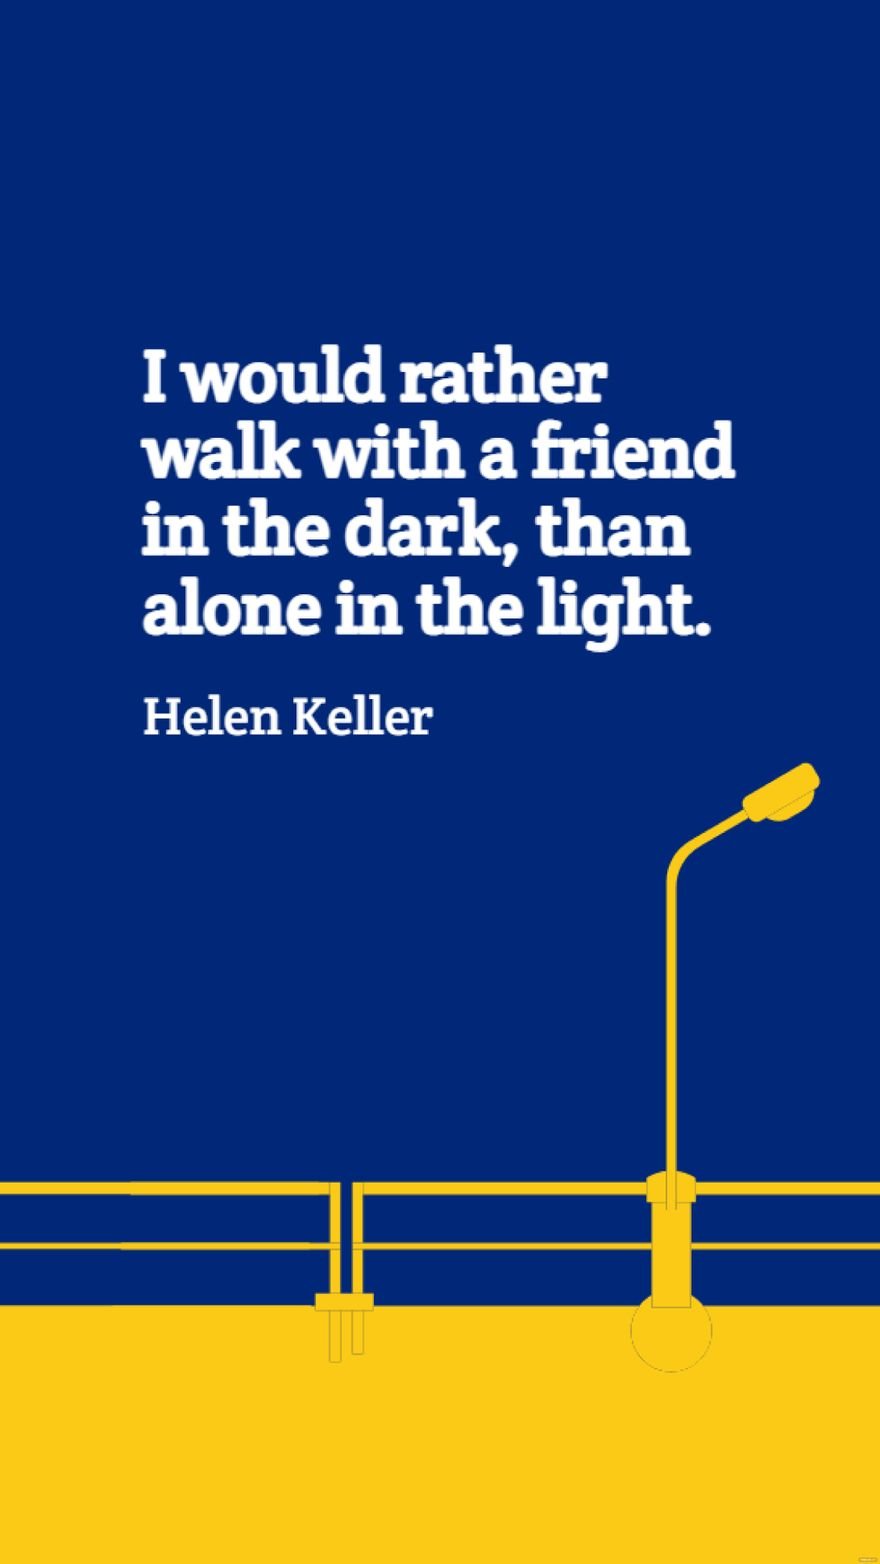 Helen Keller - I would rather walk with a friend in the dark, than alone in the light.